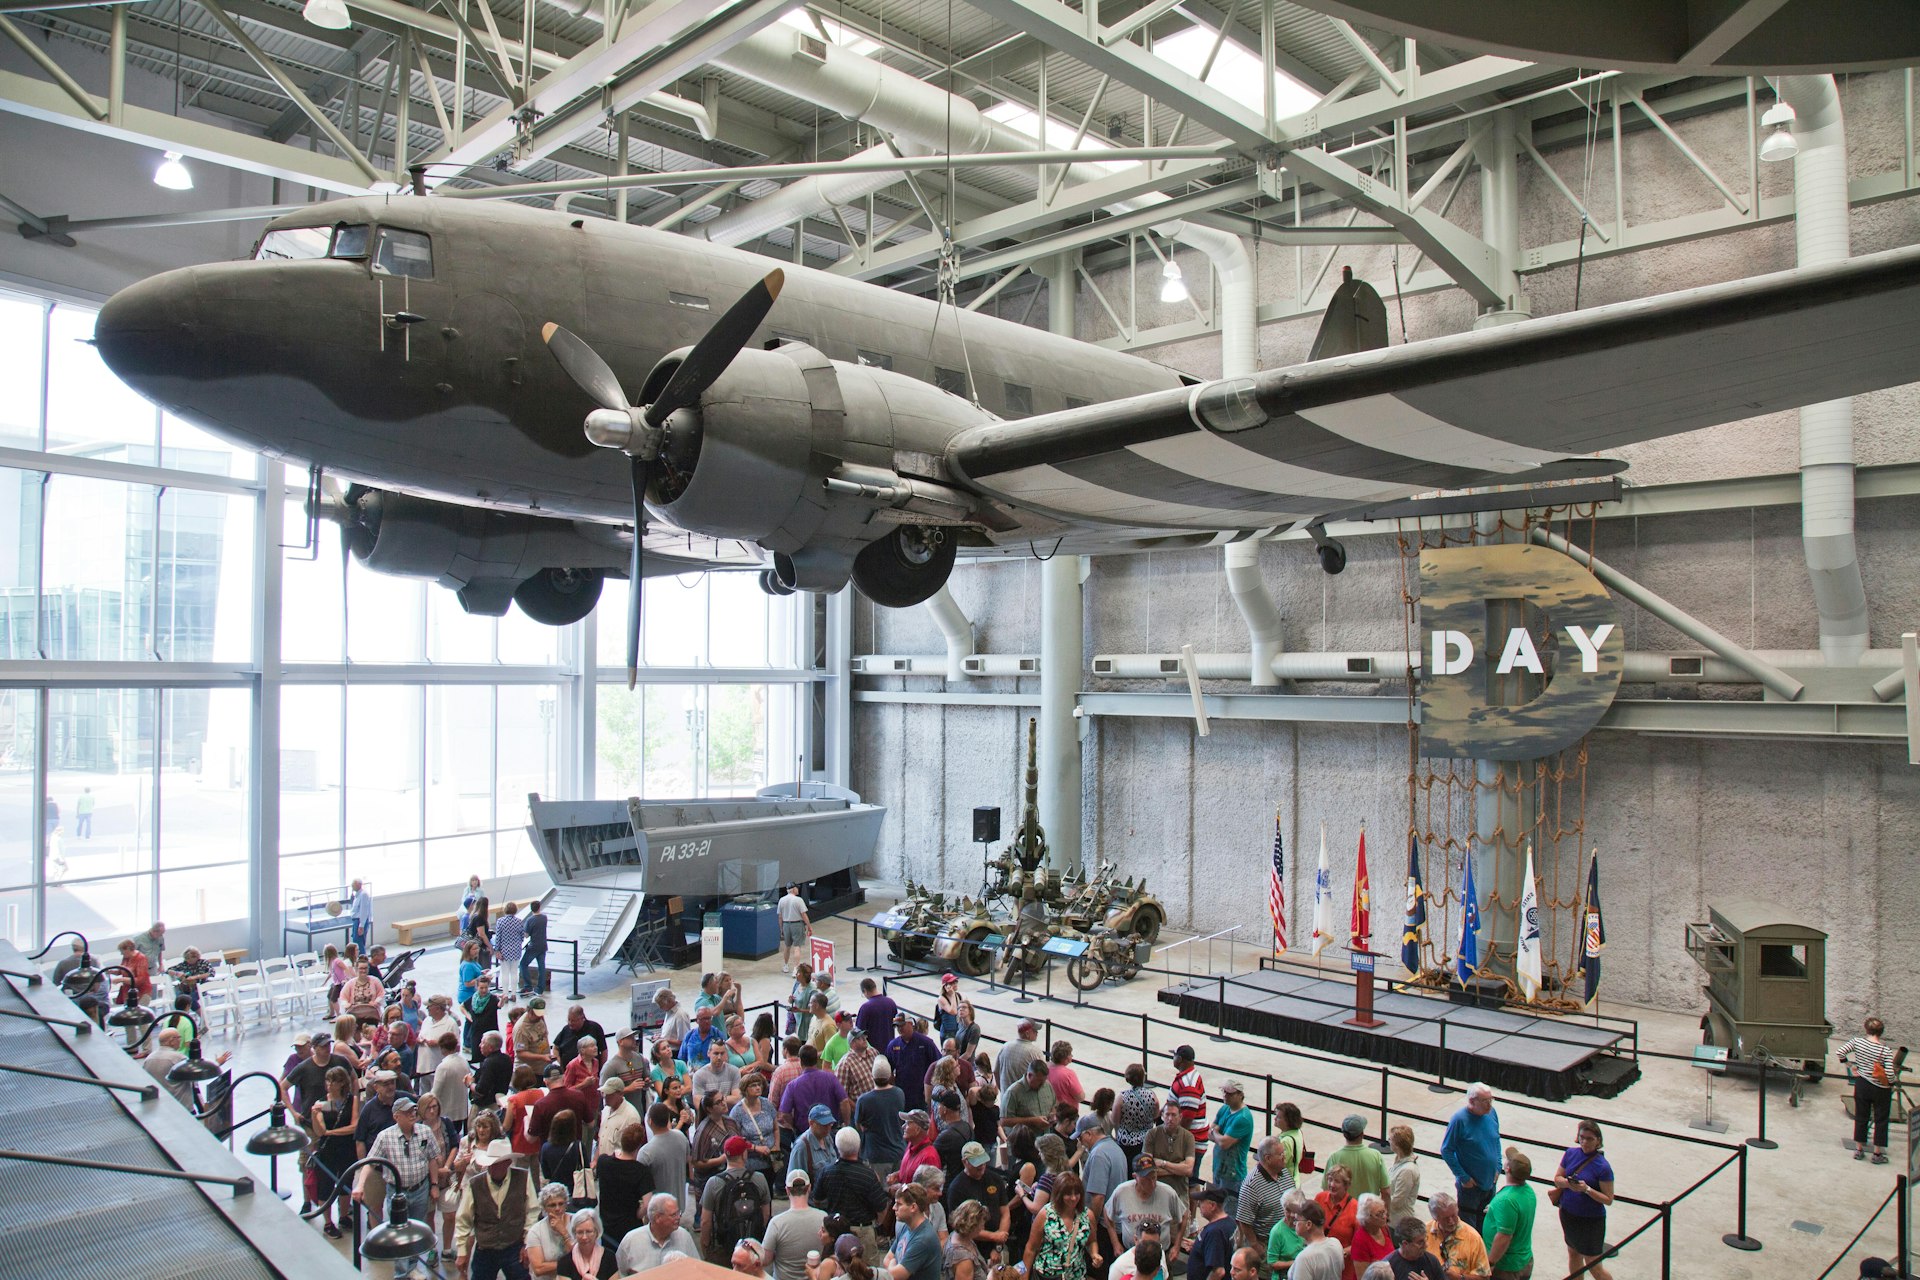 Louisiana Memorial Museum Atrium is the entry area for the The National World War II Museum, New Orleans, Louoisiana. Floor displays include the Higg